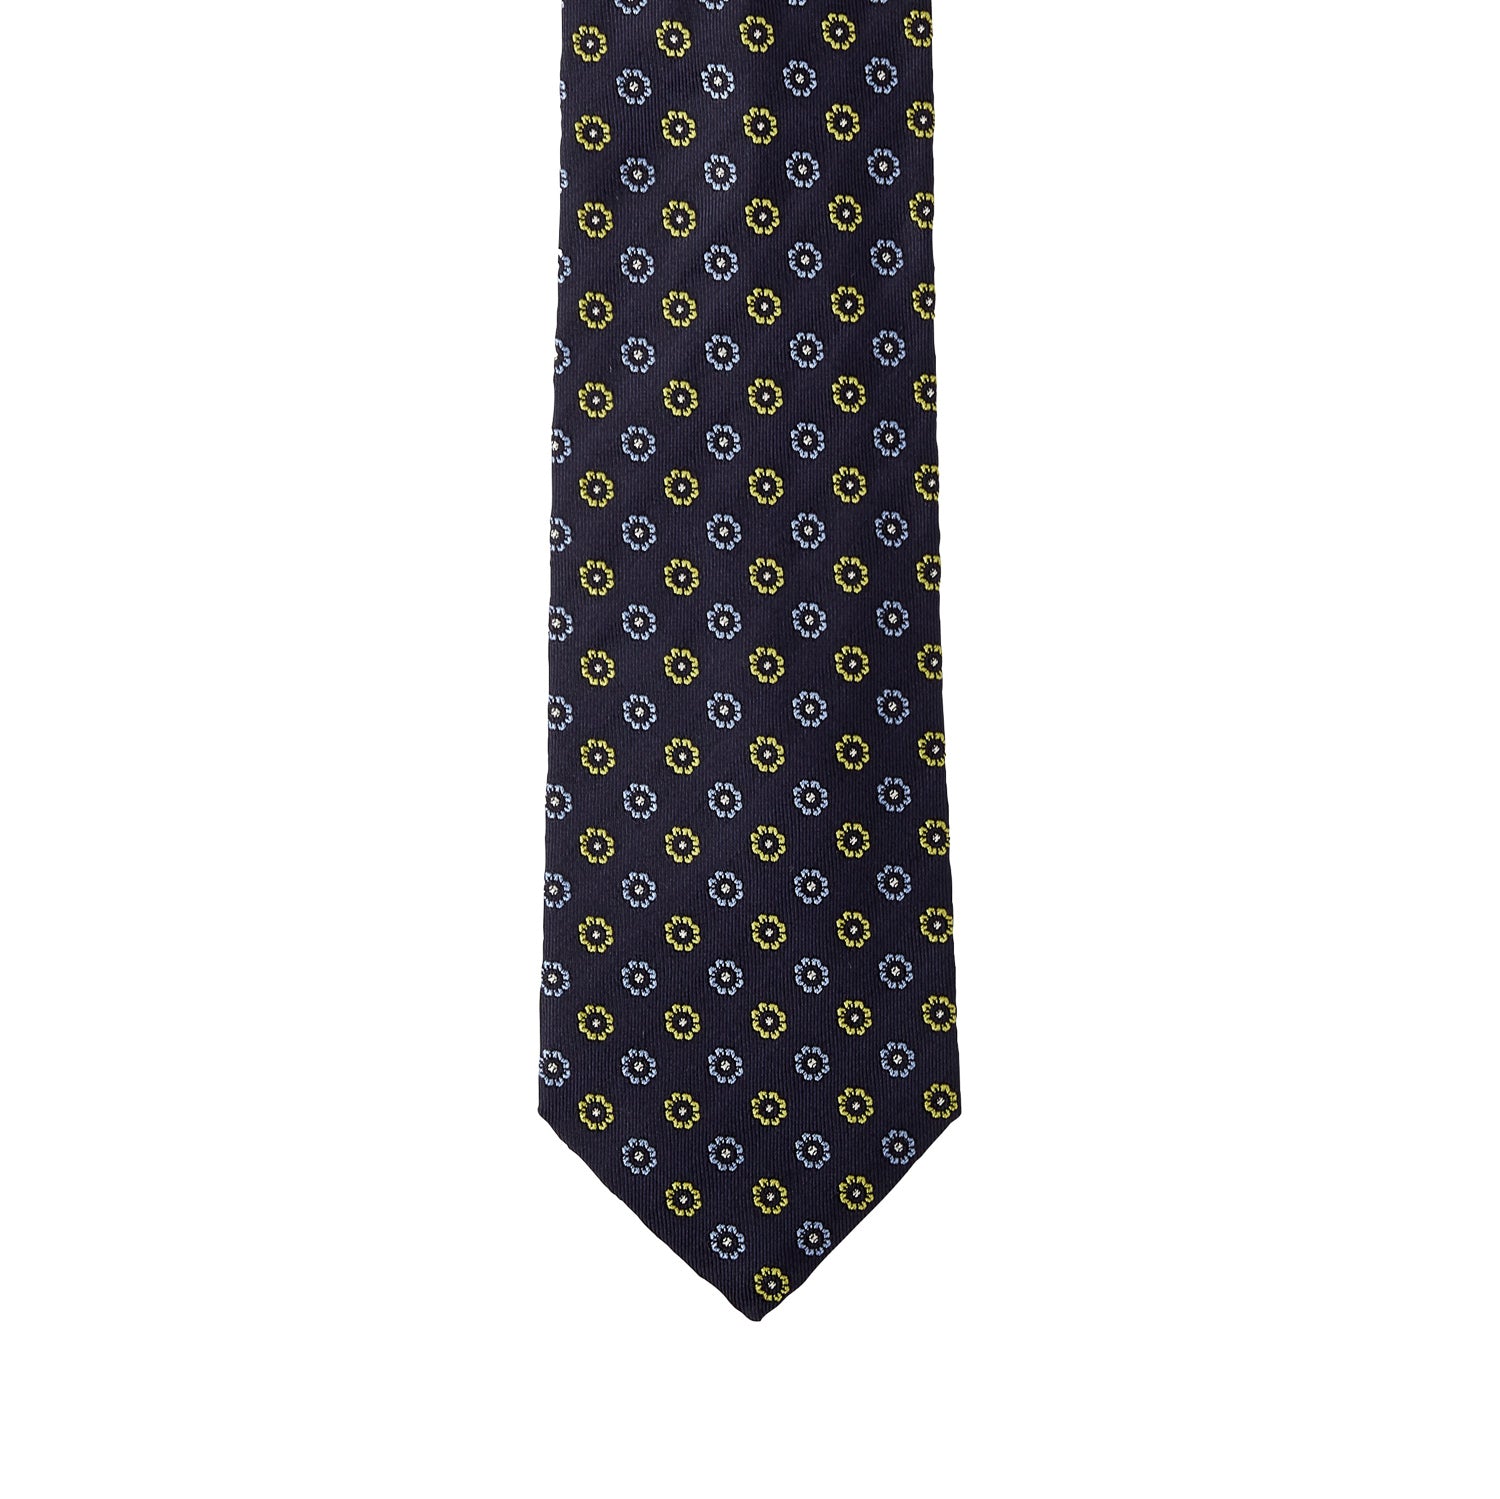 A quality Sovereign Grade Navy Blue and Lime Jacquard Tie handmade by KirbyAllison.com.